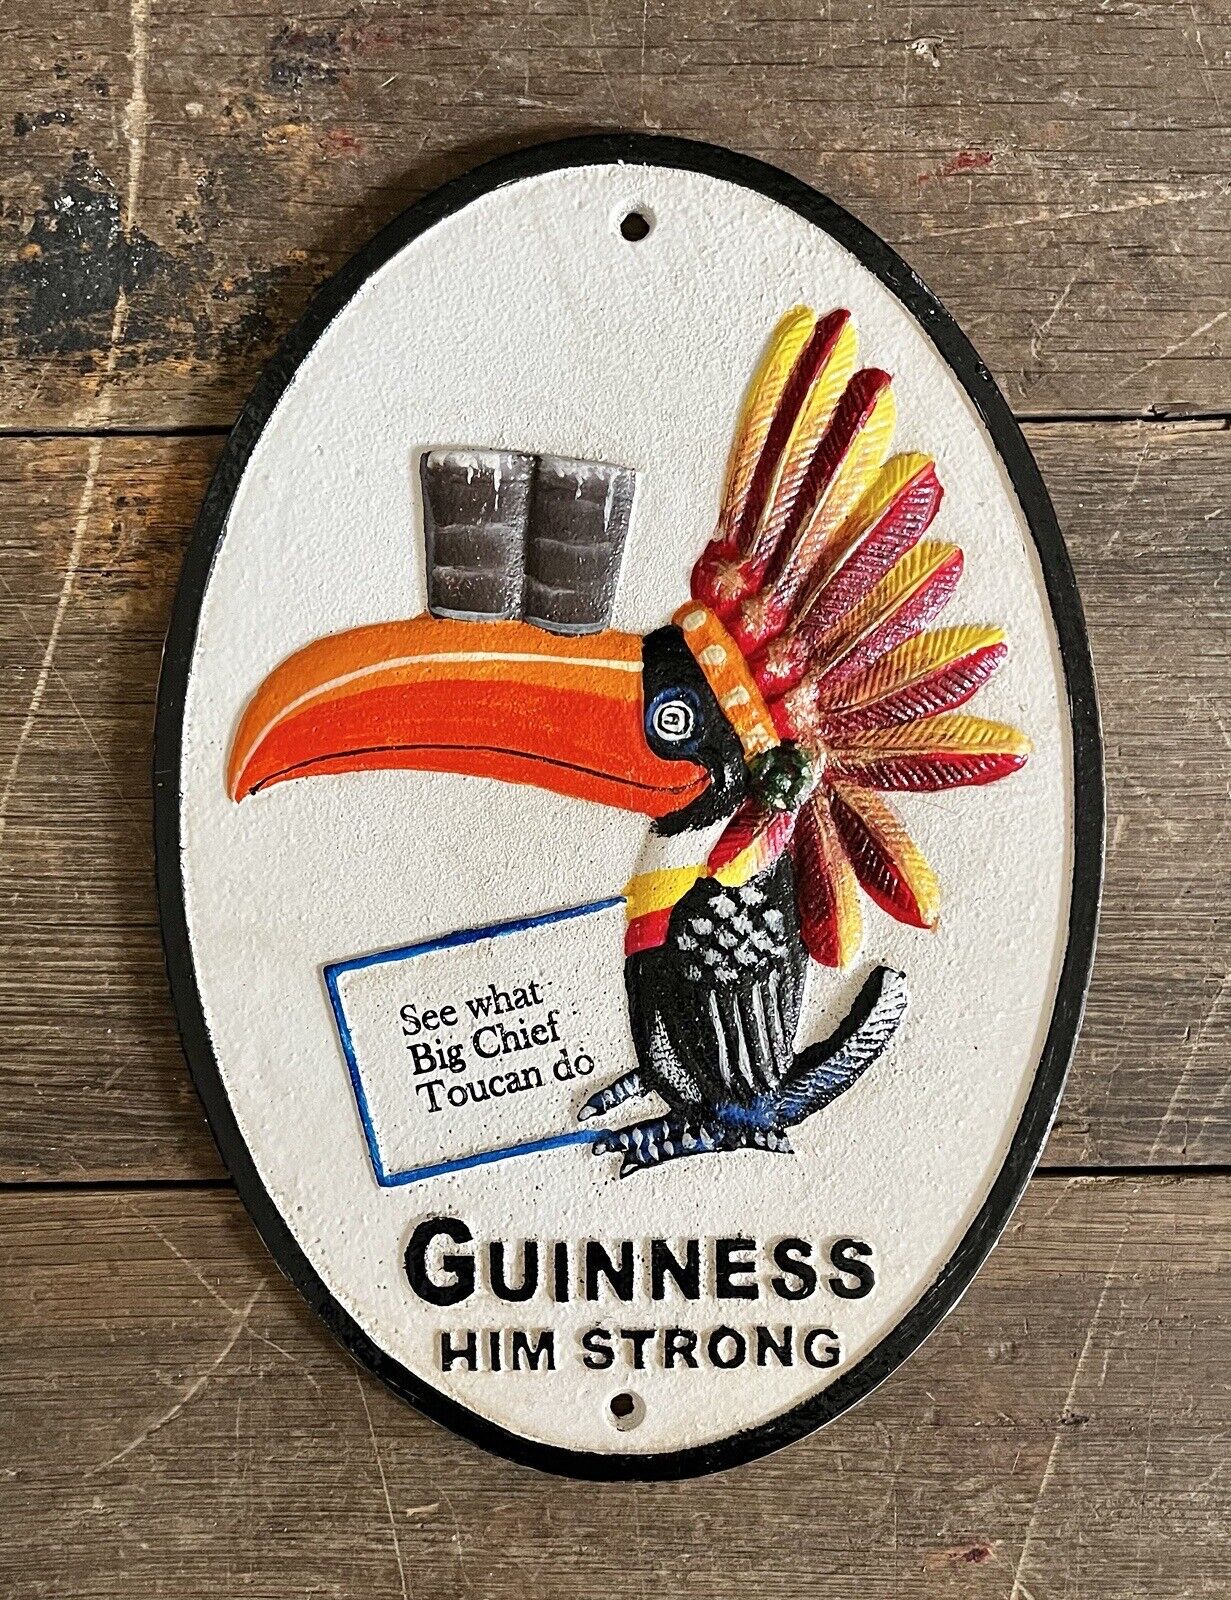 GUINNESS ~ See What Big Chief Toucan Do, Cast Iron Oval Beer Sign, 11” x 8”